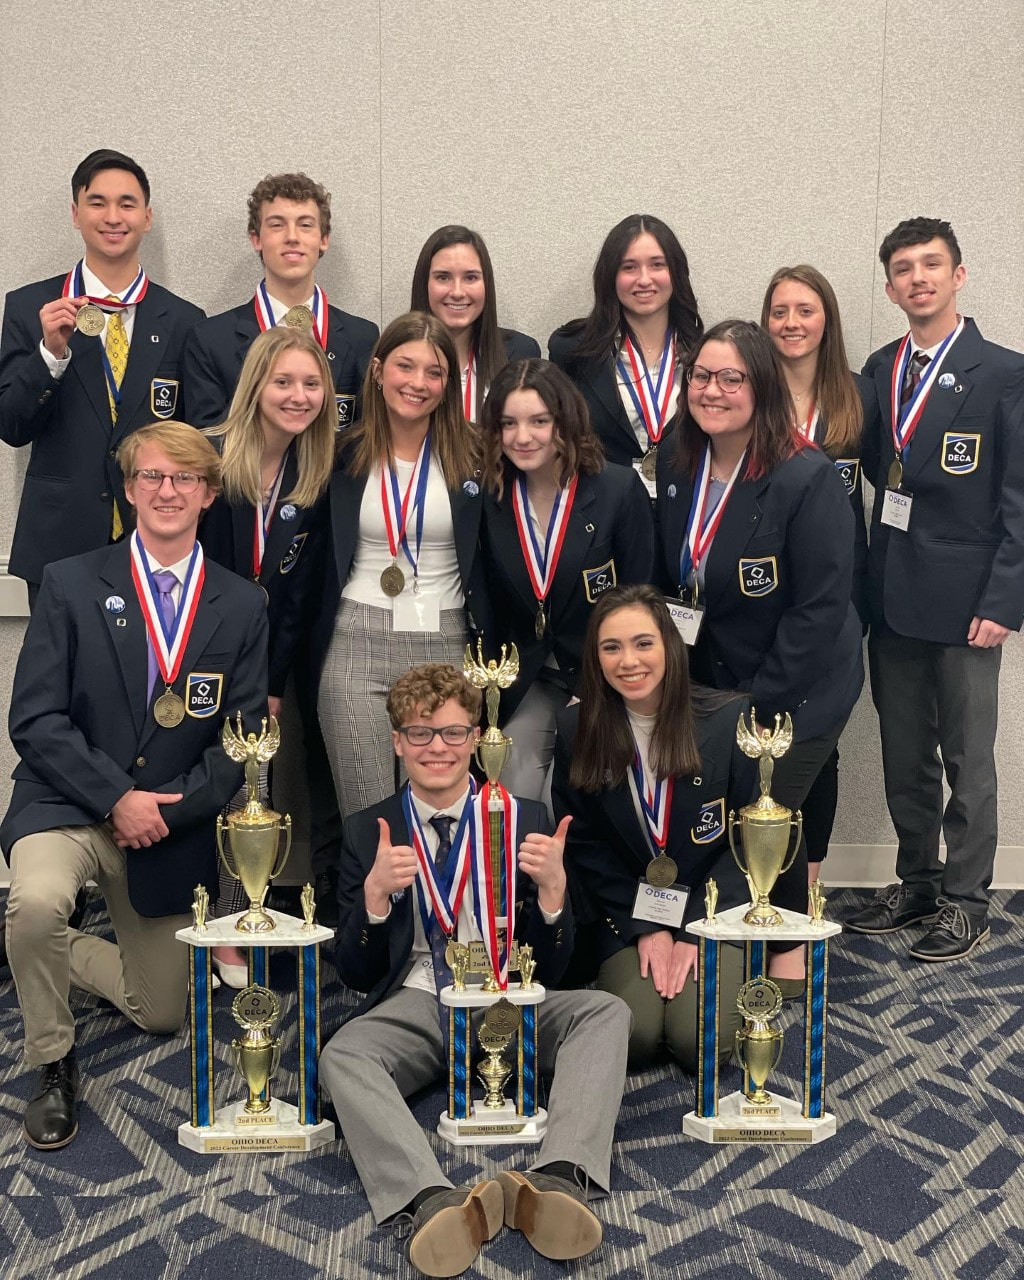 Urbana High School DECA students that placed top 10 in their event